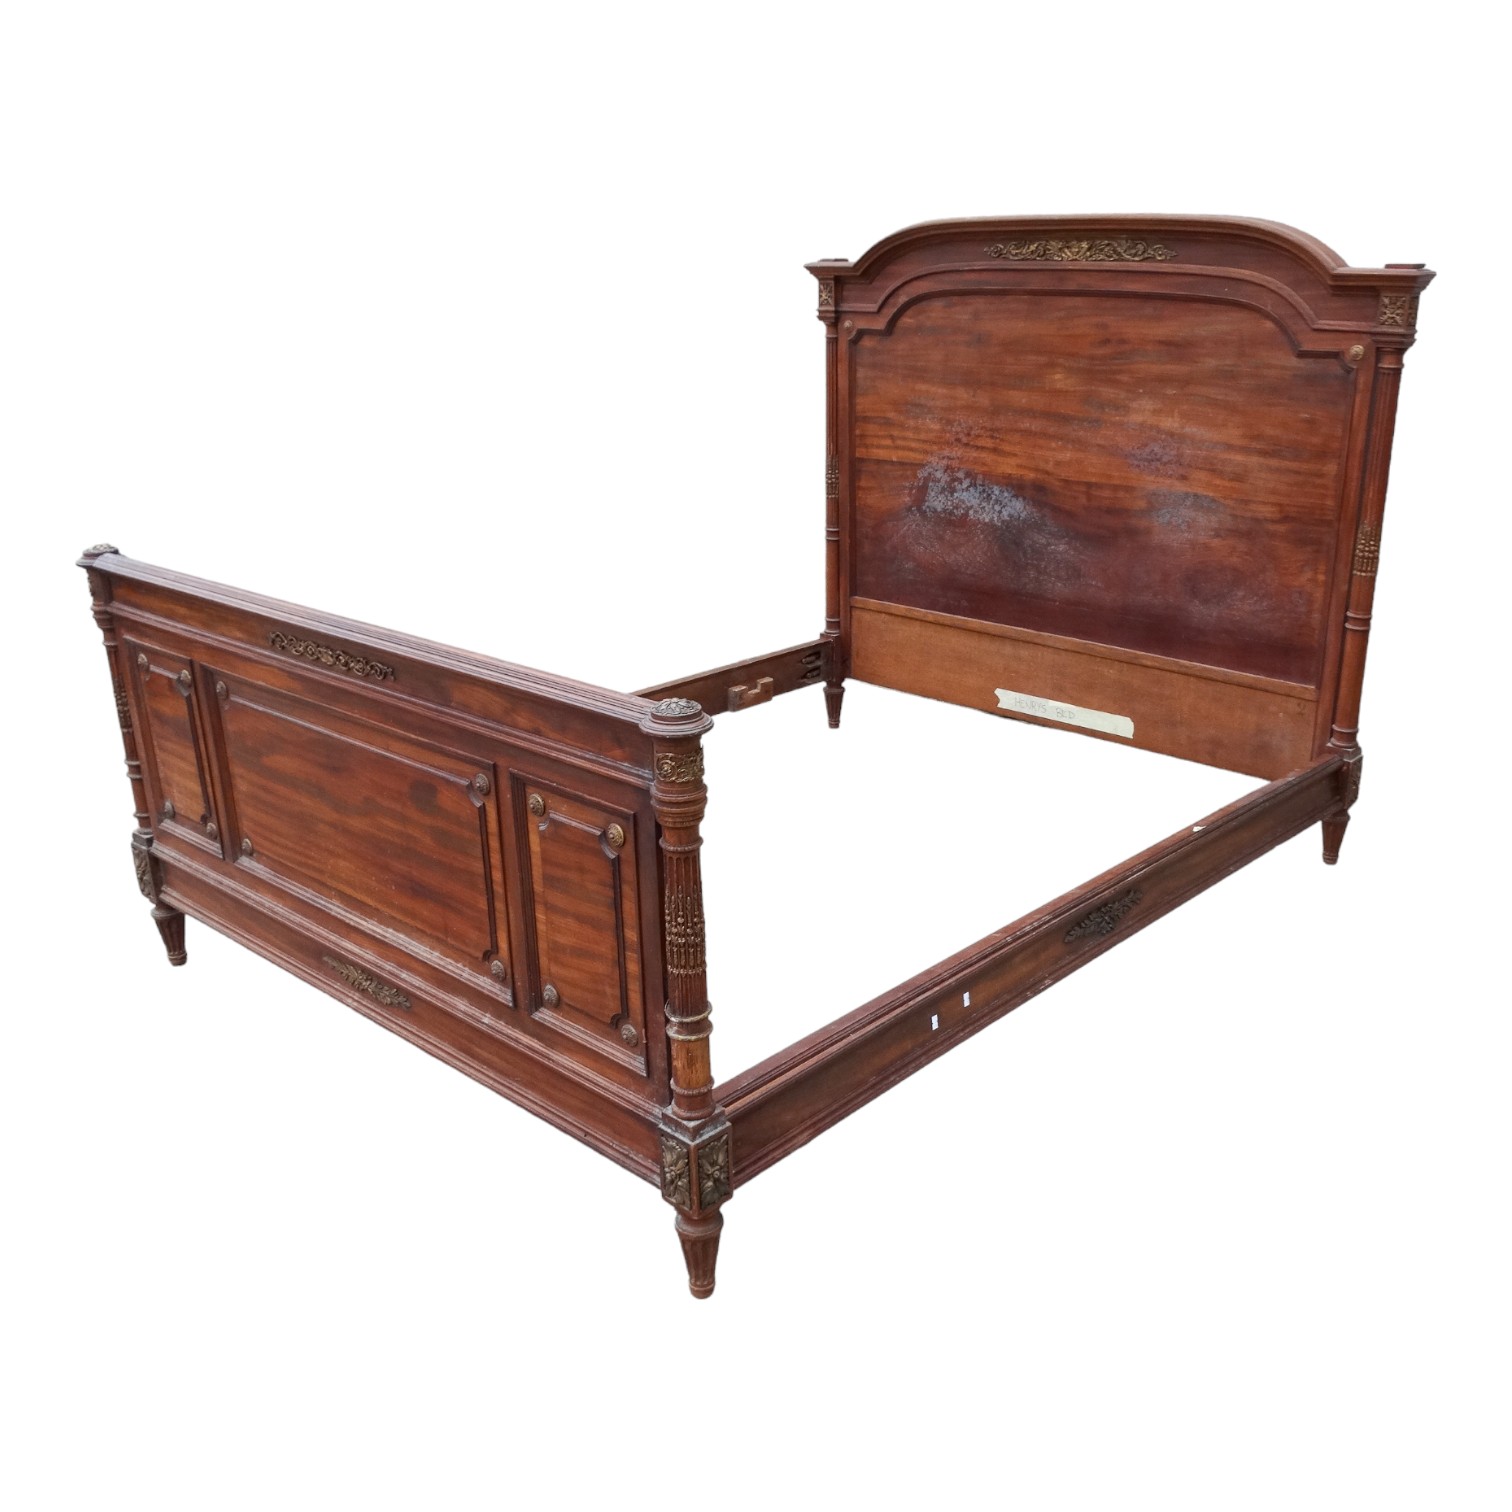 A Louis XVI style mahogany double bed - the panelled head and foot boards with fluted column - Image 5 of 5